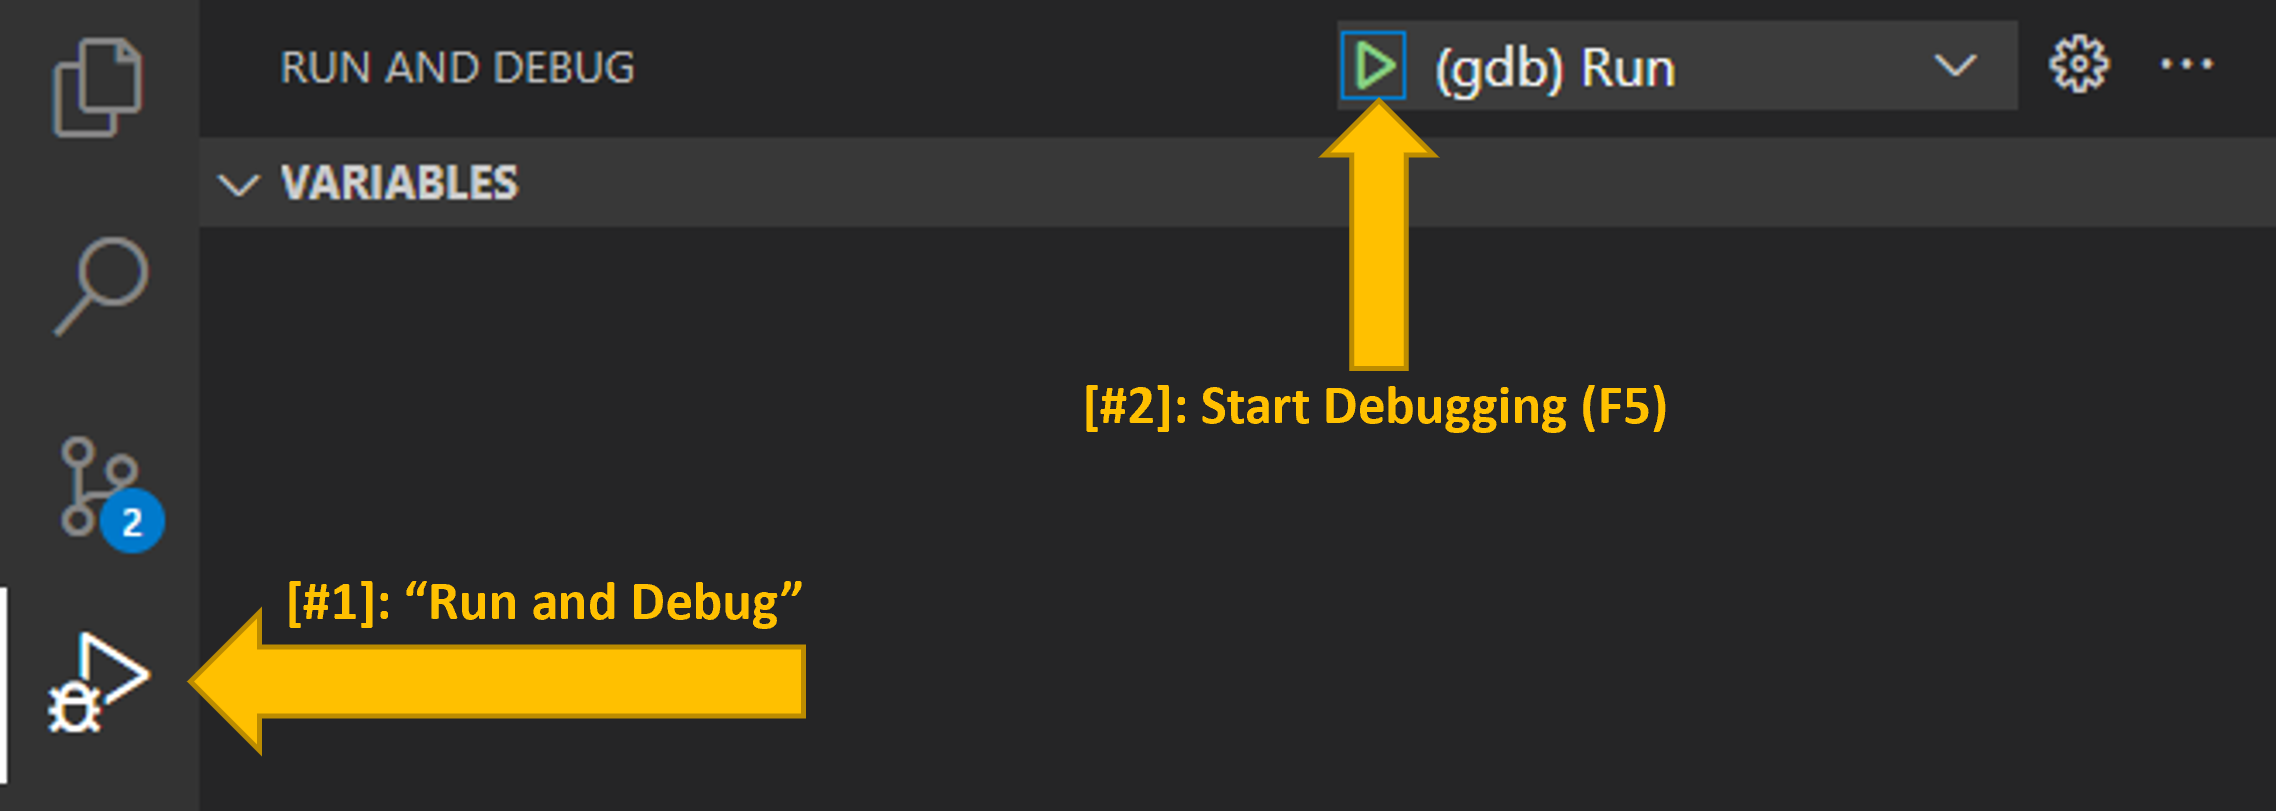 Location of debug buttons in default VSCode intrface